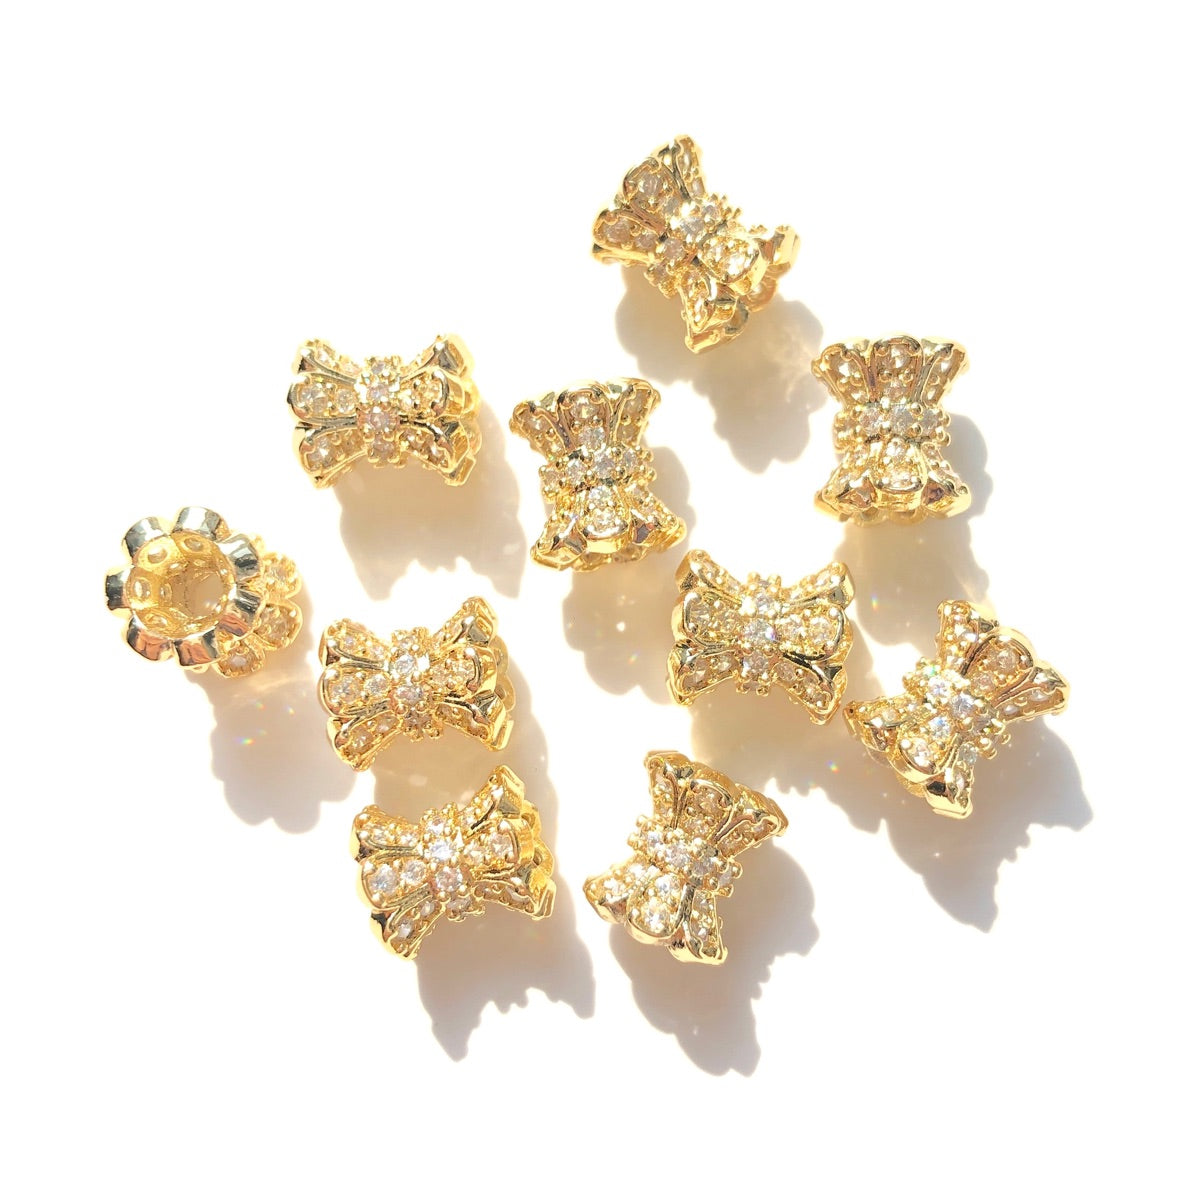 10-20-50pcs/lot CZ Paved Hourglass Spacers Gold CZ Paved Spacers Hourglass Beads New Spacers Arrivals Wholesale Charms Beads Beyond